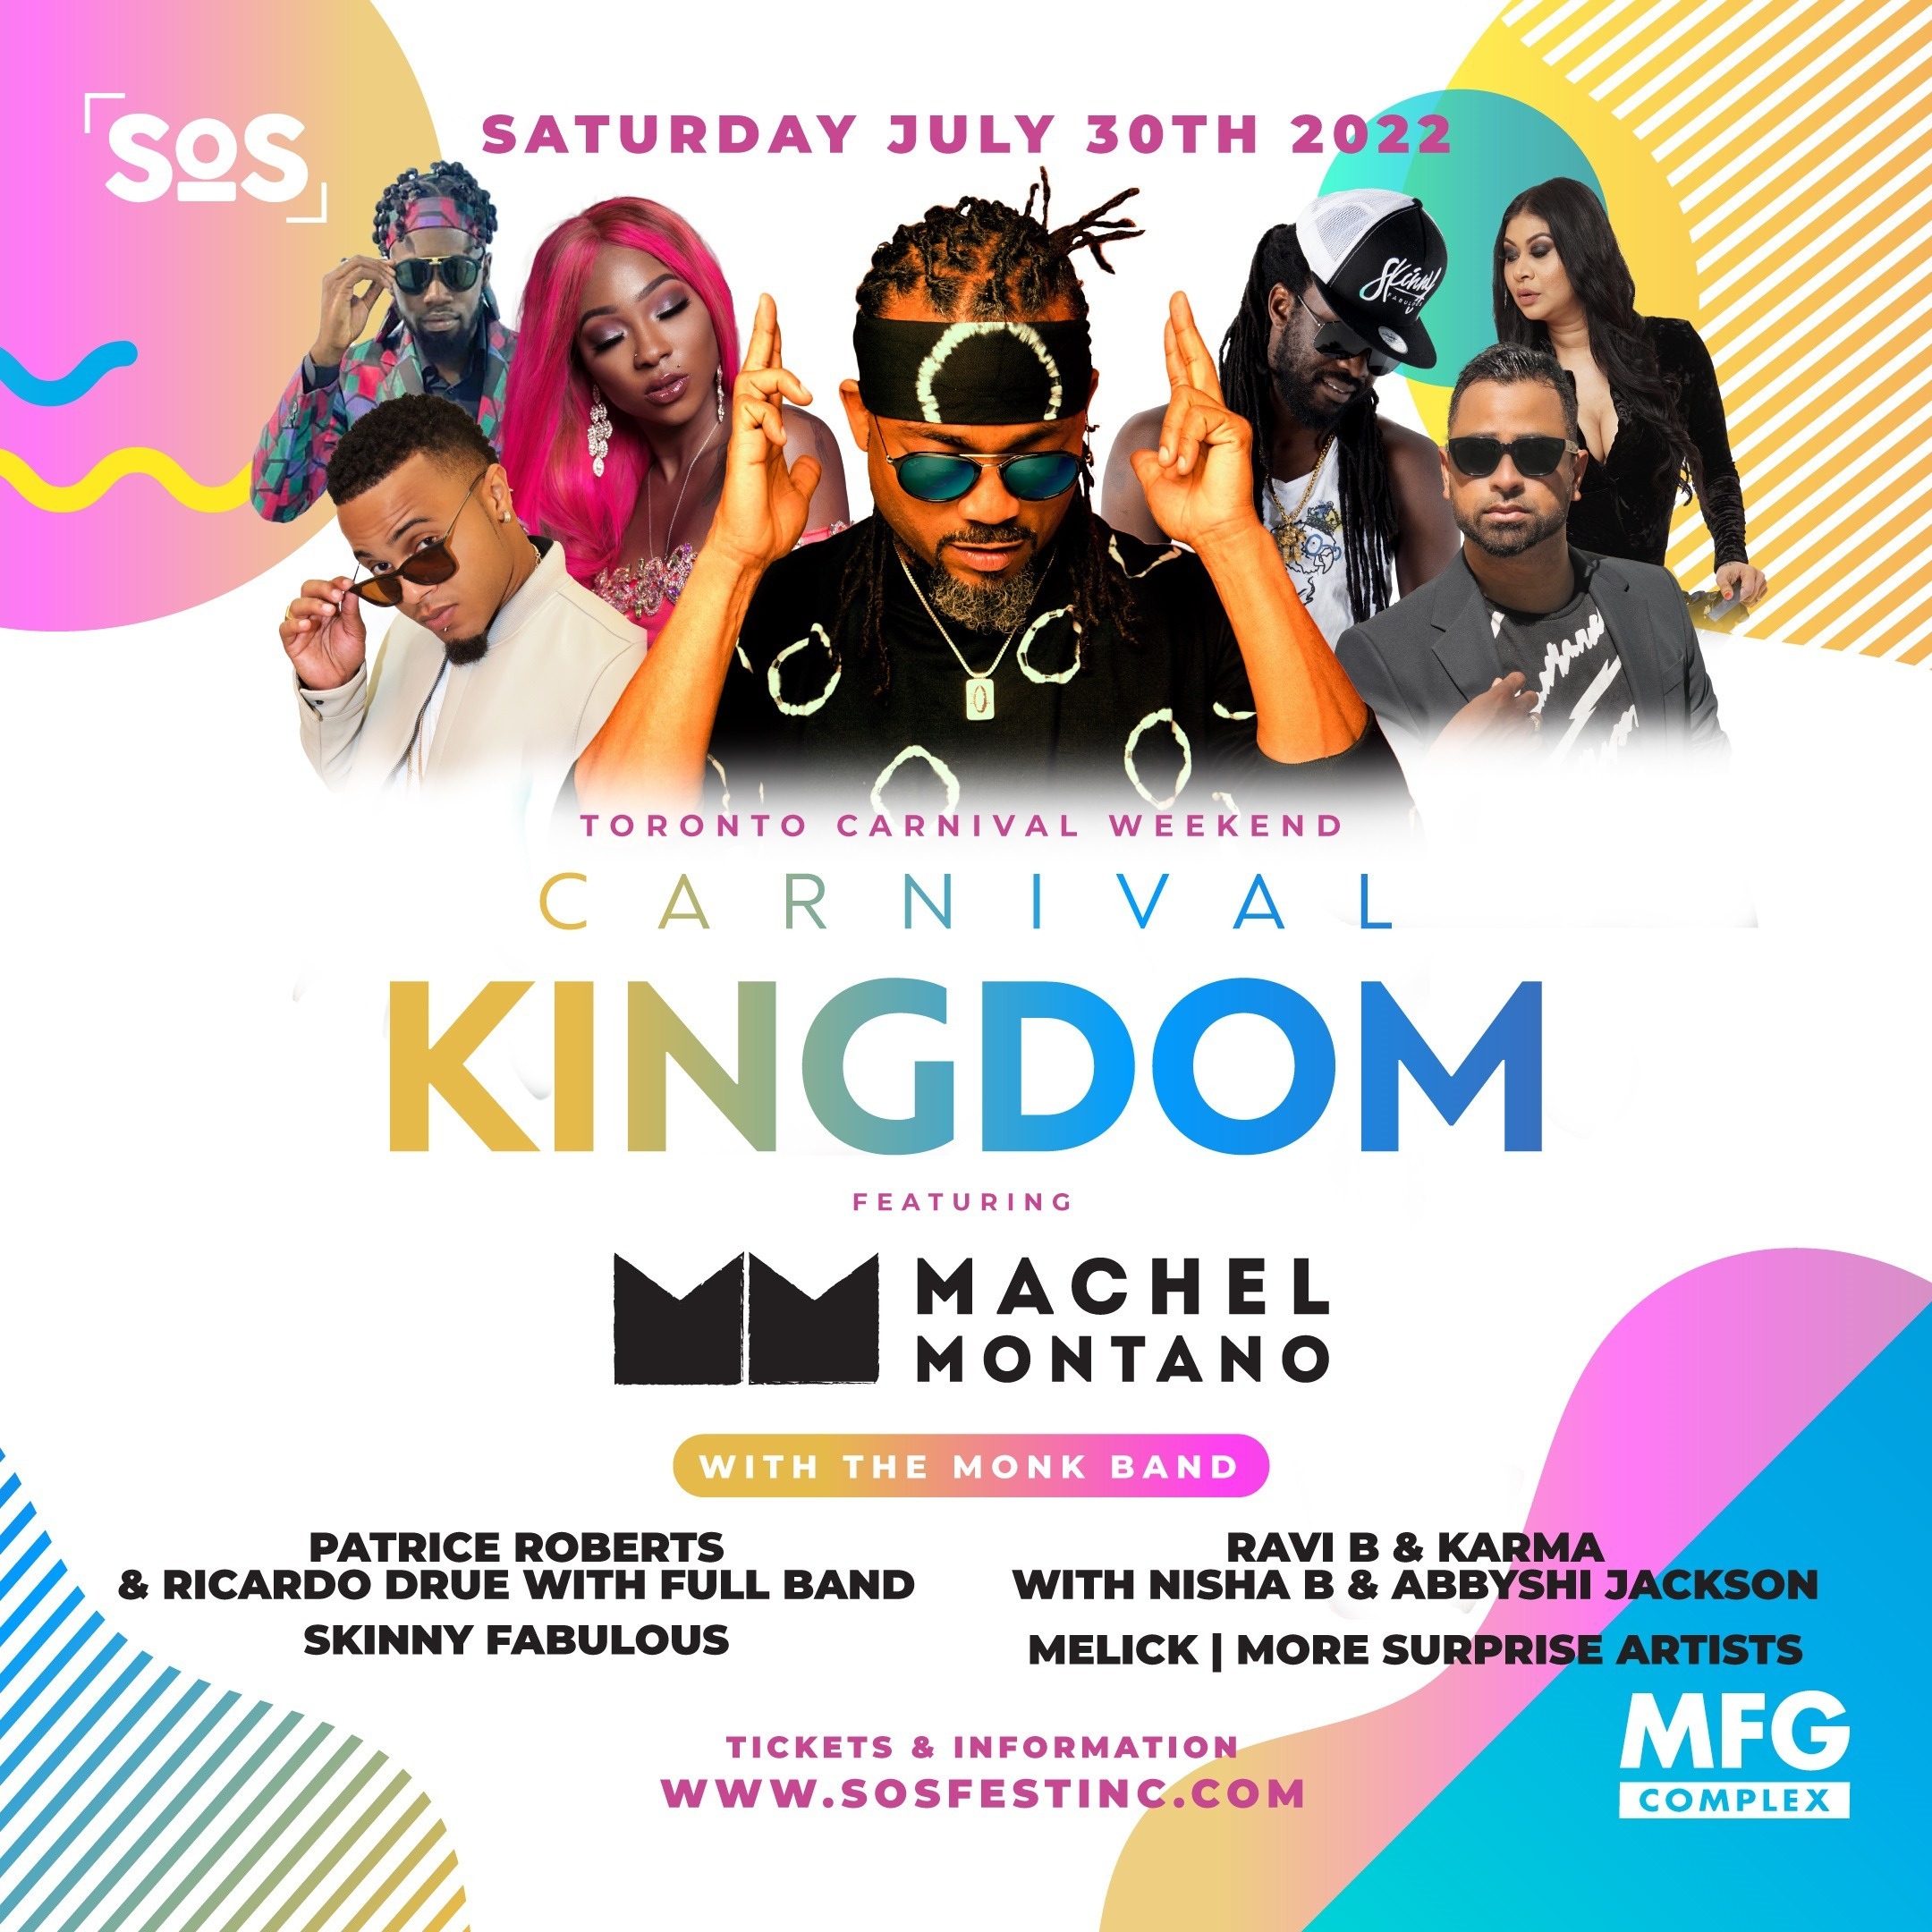 CARNIVAL KINGDOM WITH MACHEL MONTANO AND THE MONK BAND AND FRIENDS